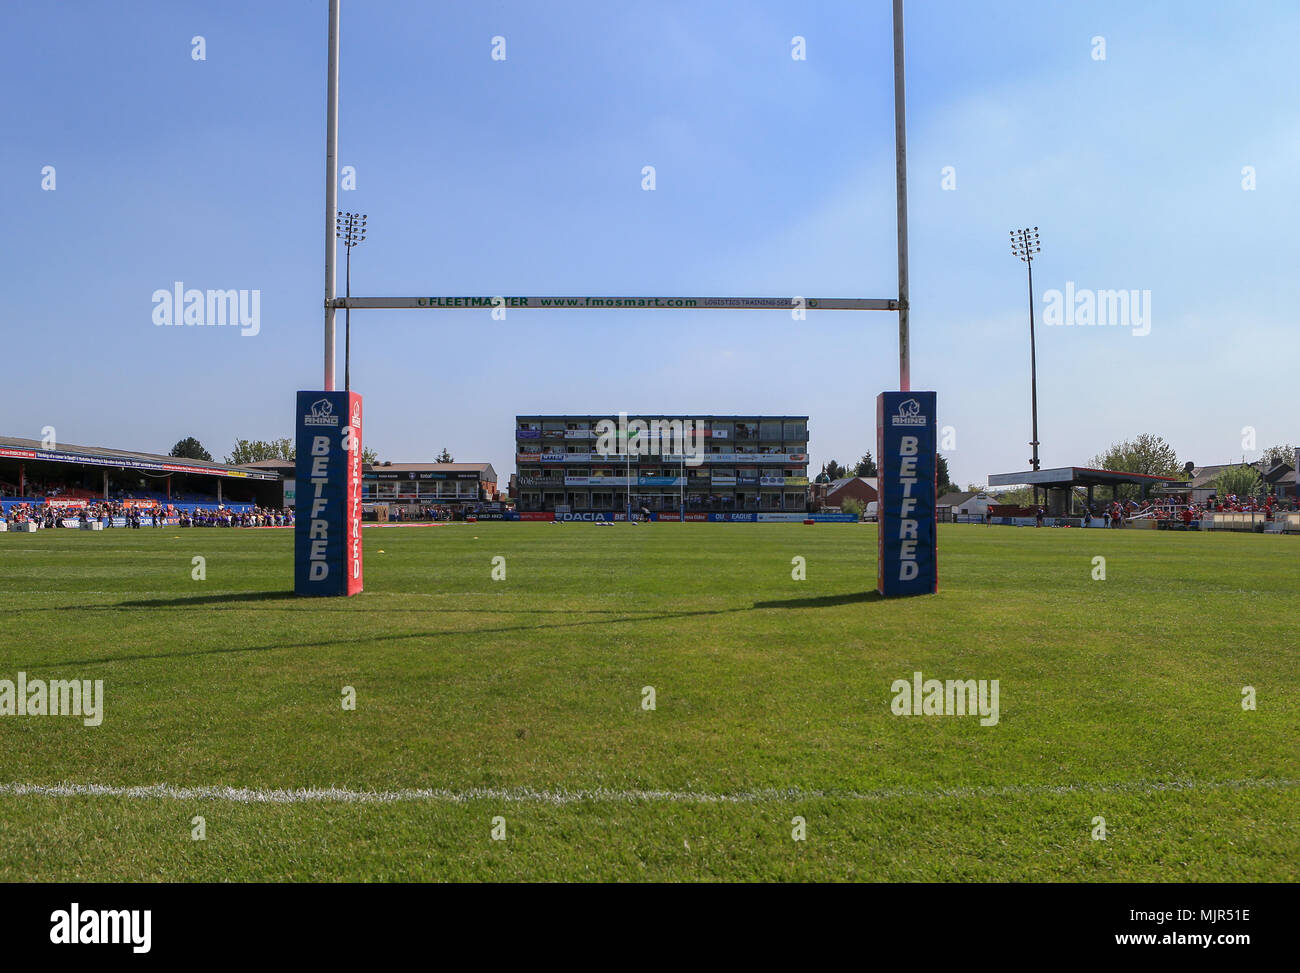 Wakefield, Royaume-Uni, 6 mai 2018. Super League rugby Betfred, Round 14,Wakefield Trinity v Hull KR ; Credit : Nouvelles Images /Alamy Live News Banque D'Images